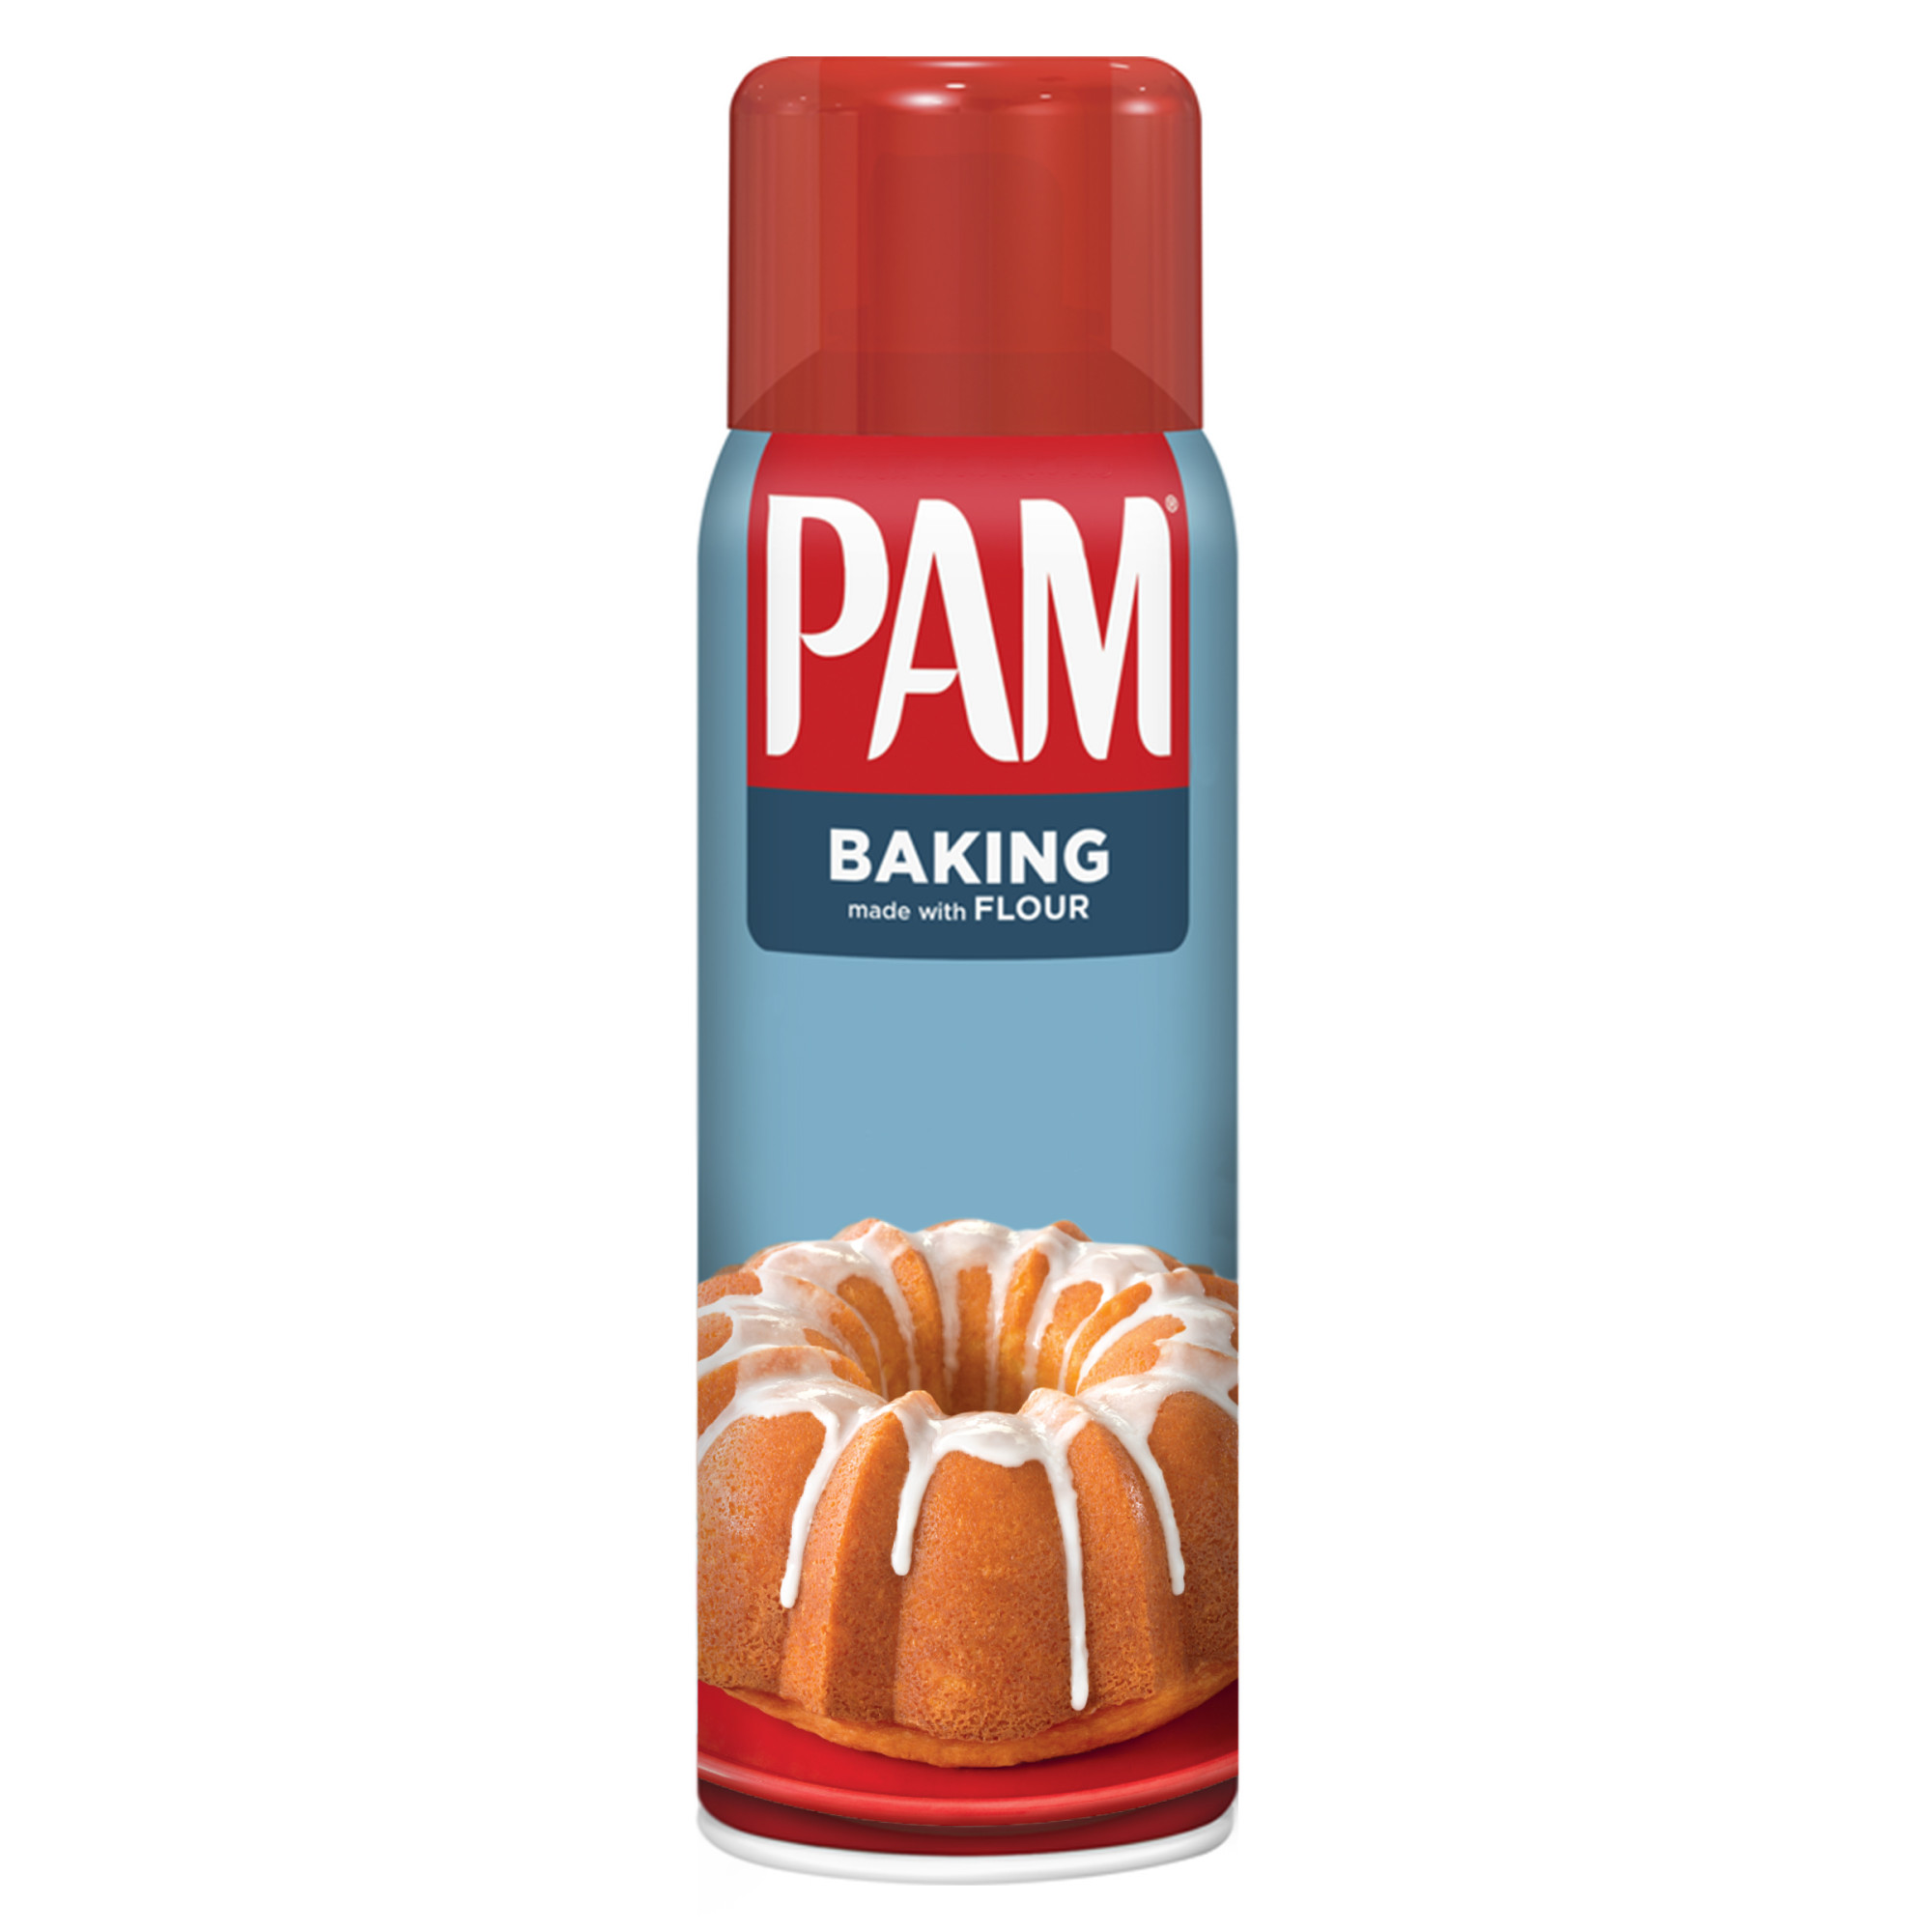 PAM Baking Spray, PerfeCount Release Nonstick Baking Spray Made with Flour, 5 oz - image 1 of 5